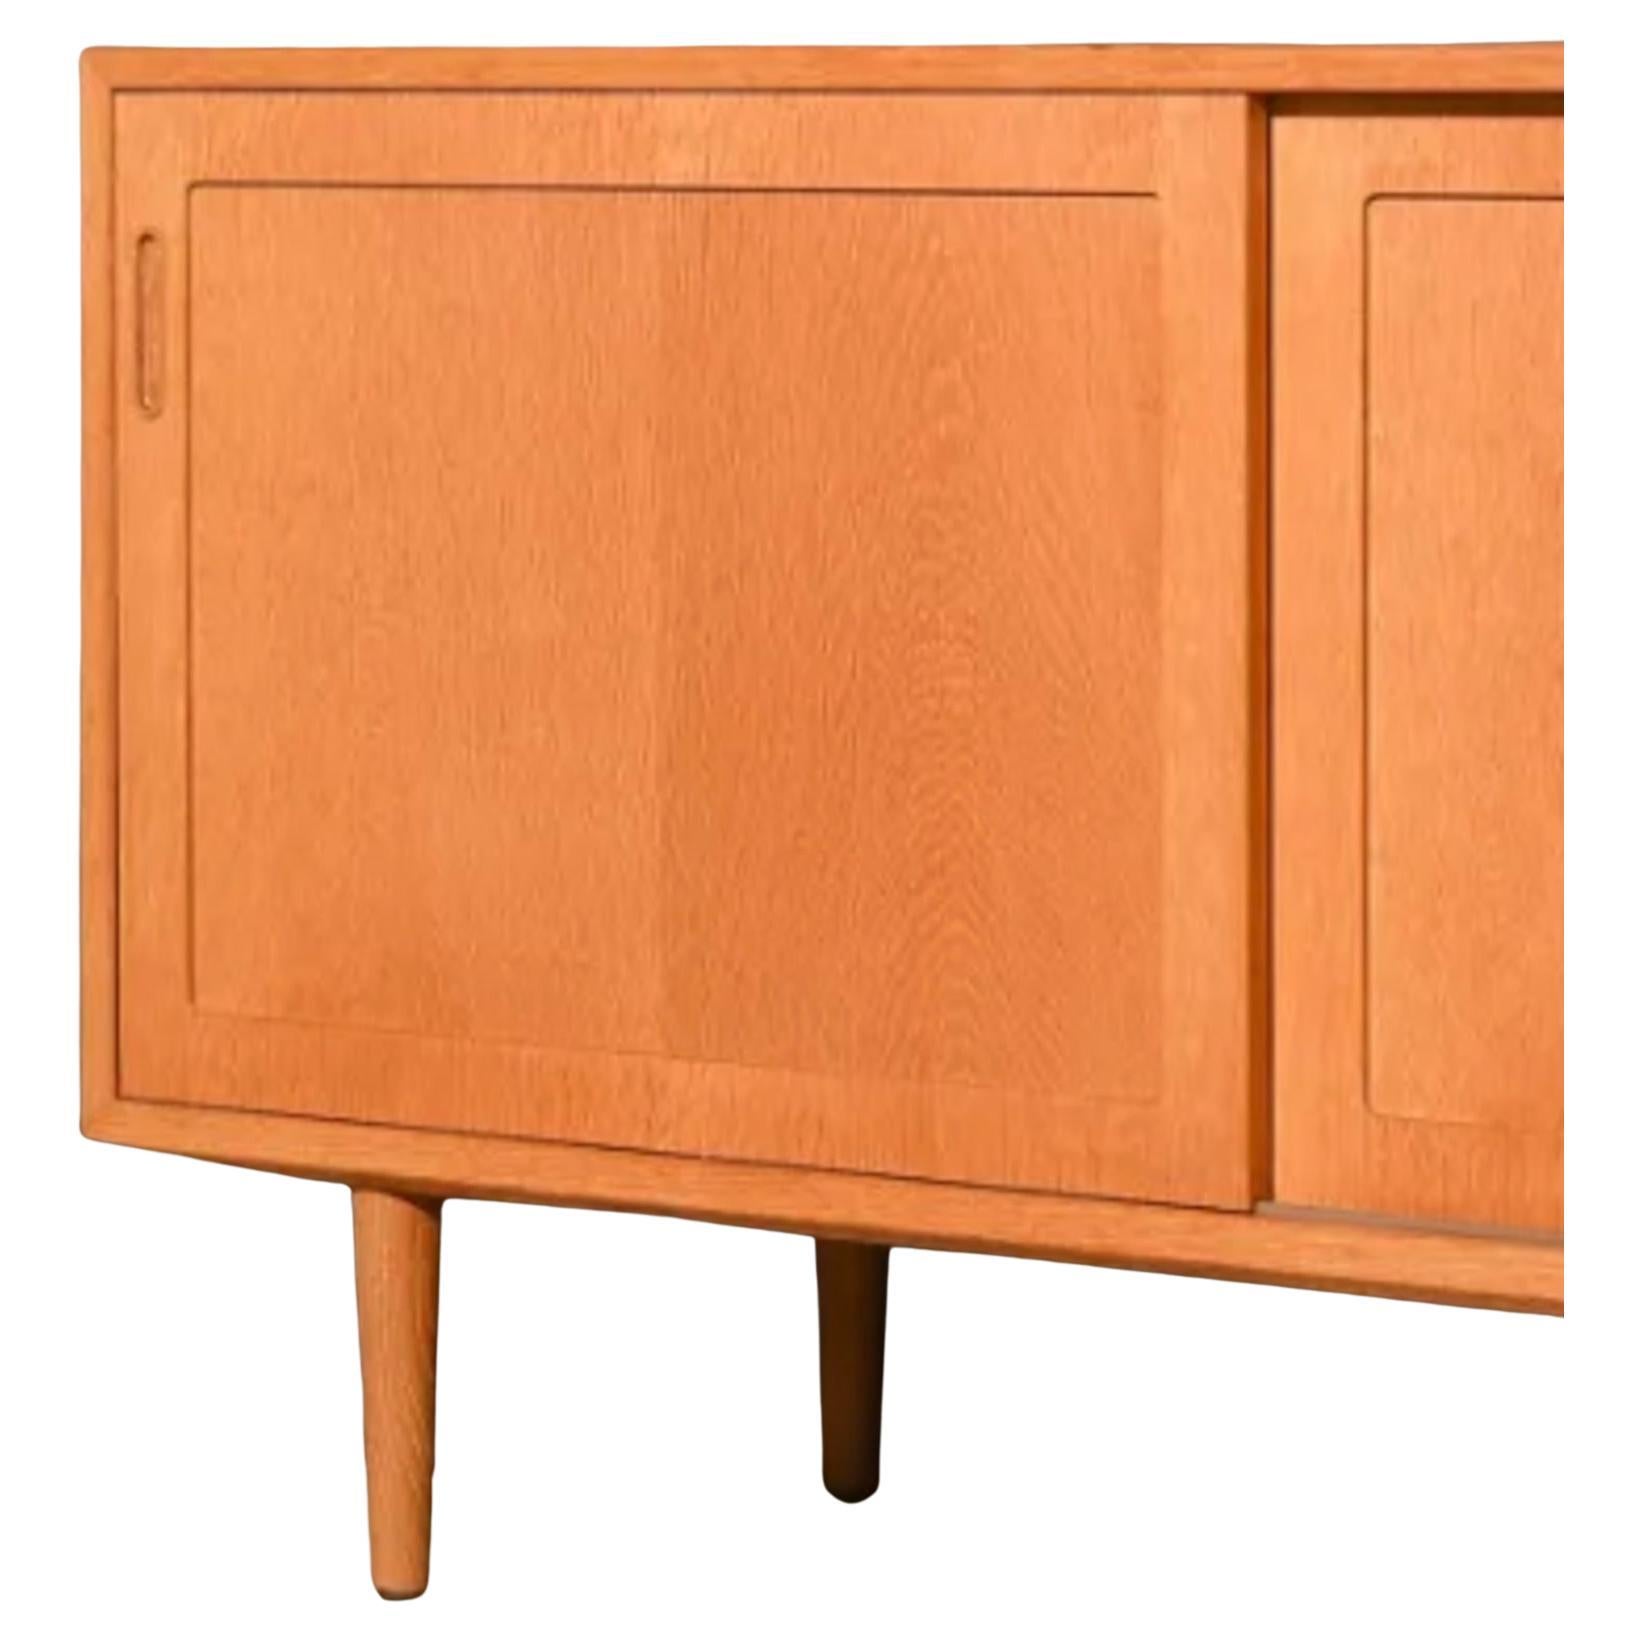 Midcentury Danish Modern Teak Sliding Door Credenza Sideboard on Tapered Legs In Good Condition For Sale In BROOKLYN, NY